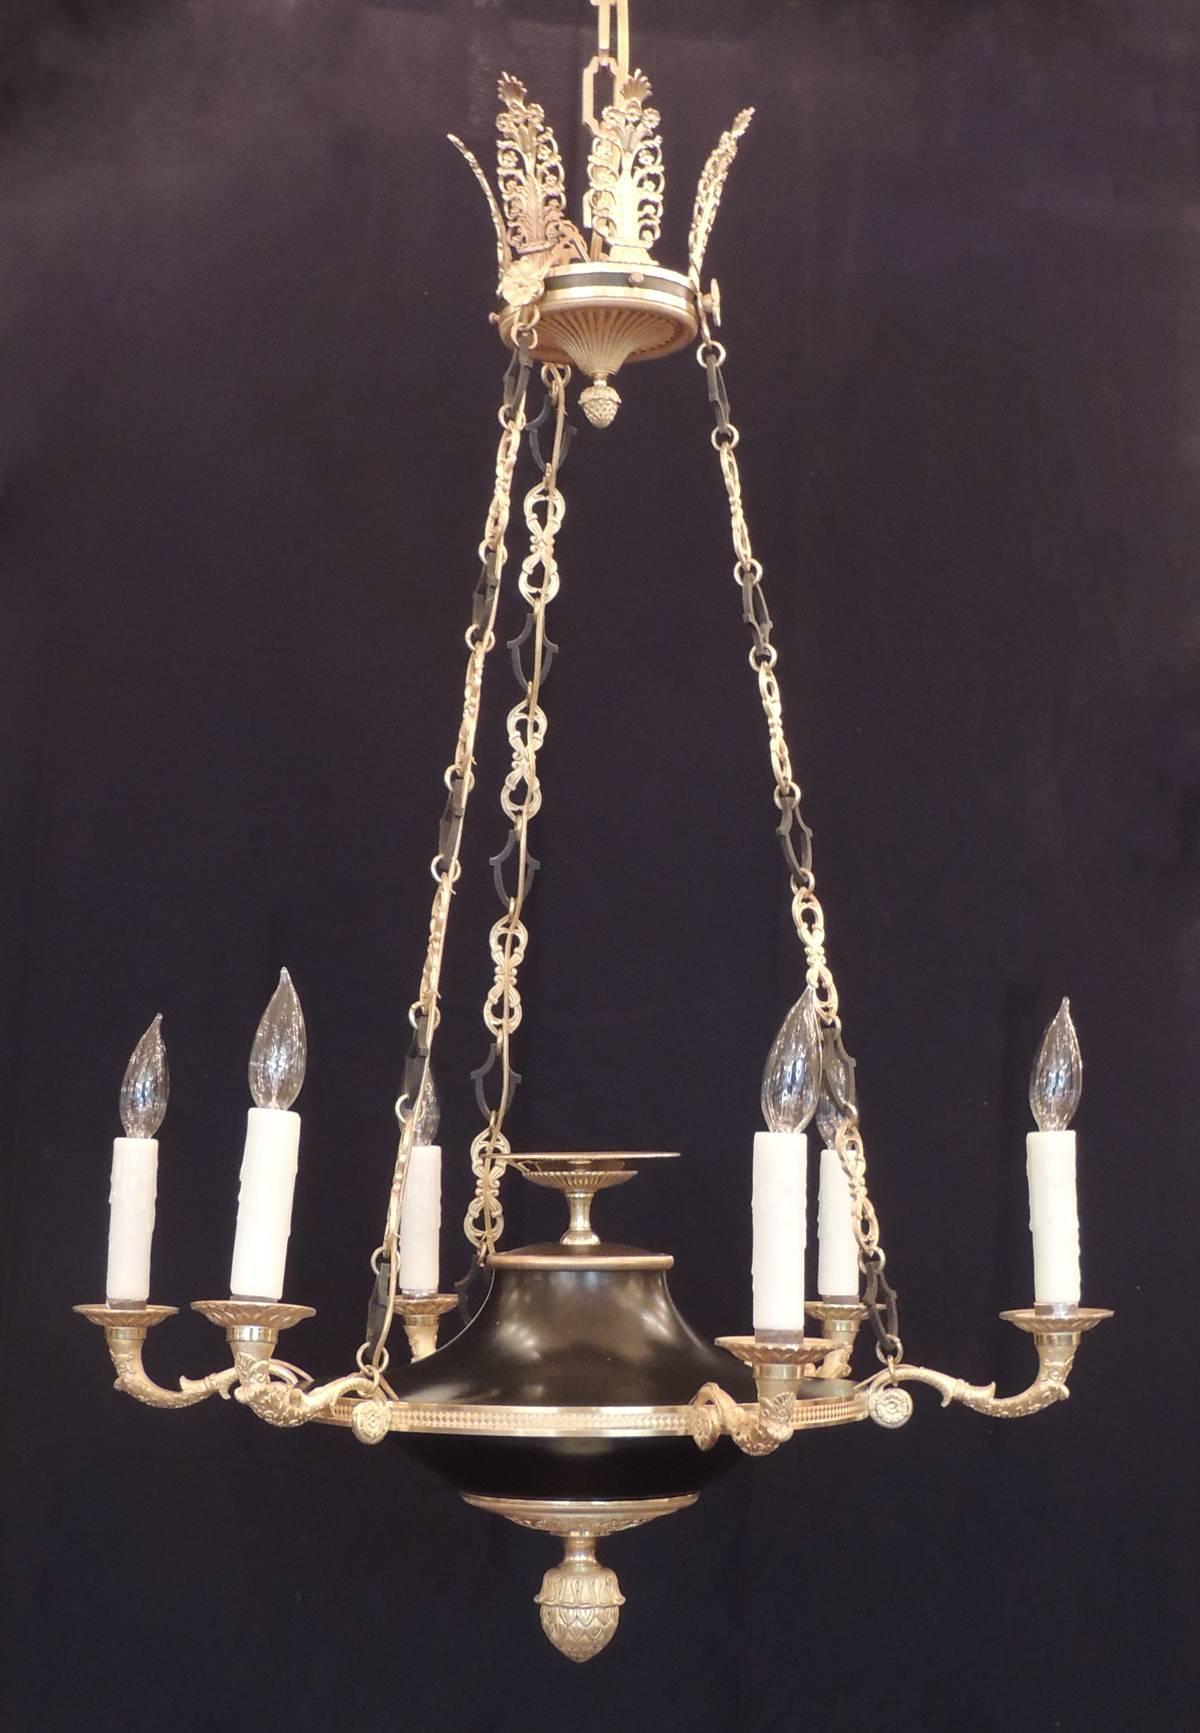 This Empire chandelier was created in France in the early-19th century, circa 1820, and has a crown with six palmettes and three suspending gold and black chains to support the body. The main body of the fixture has a center bronze urn, six arms and